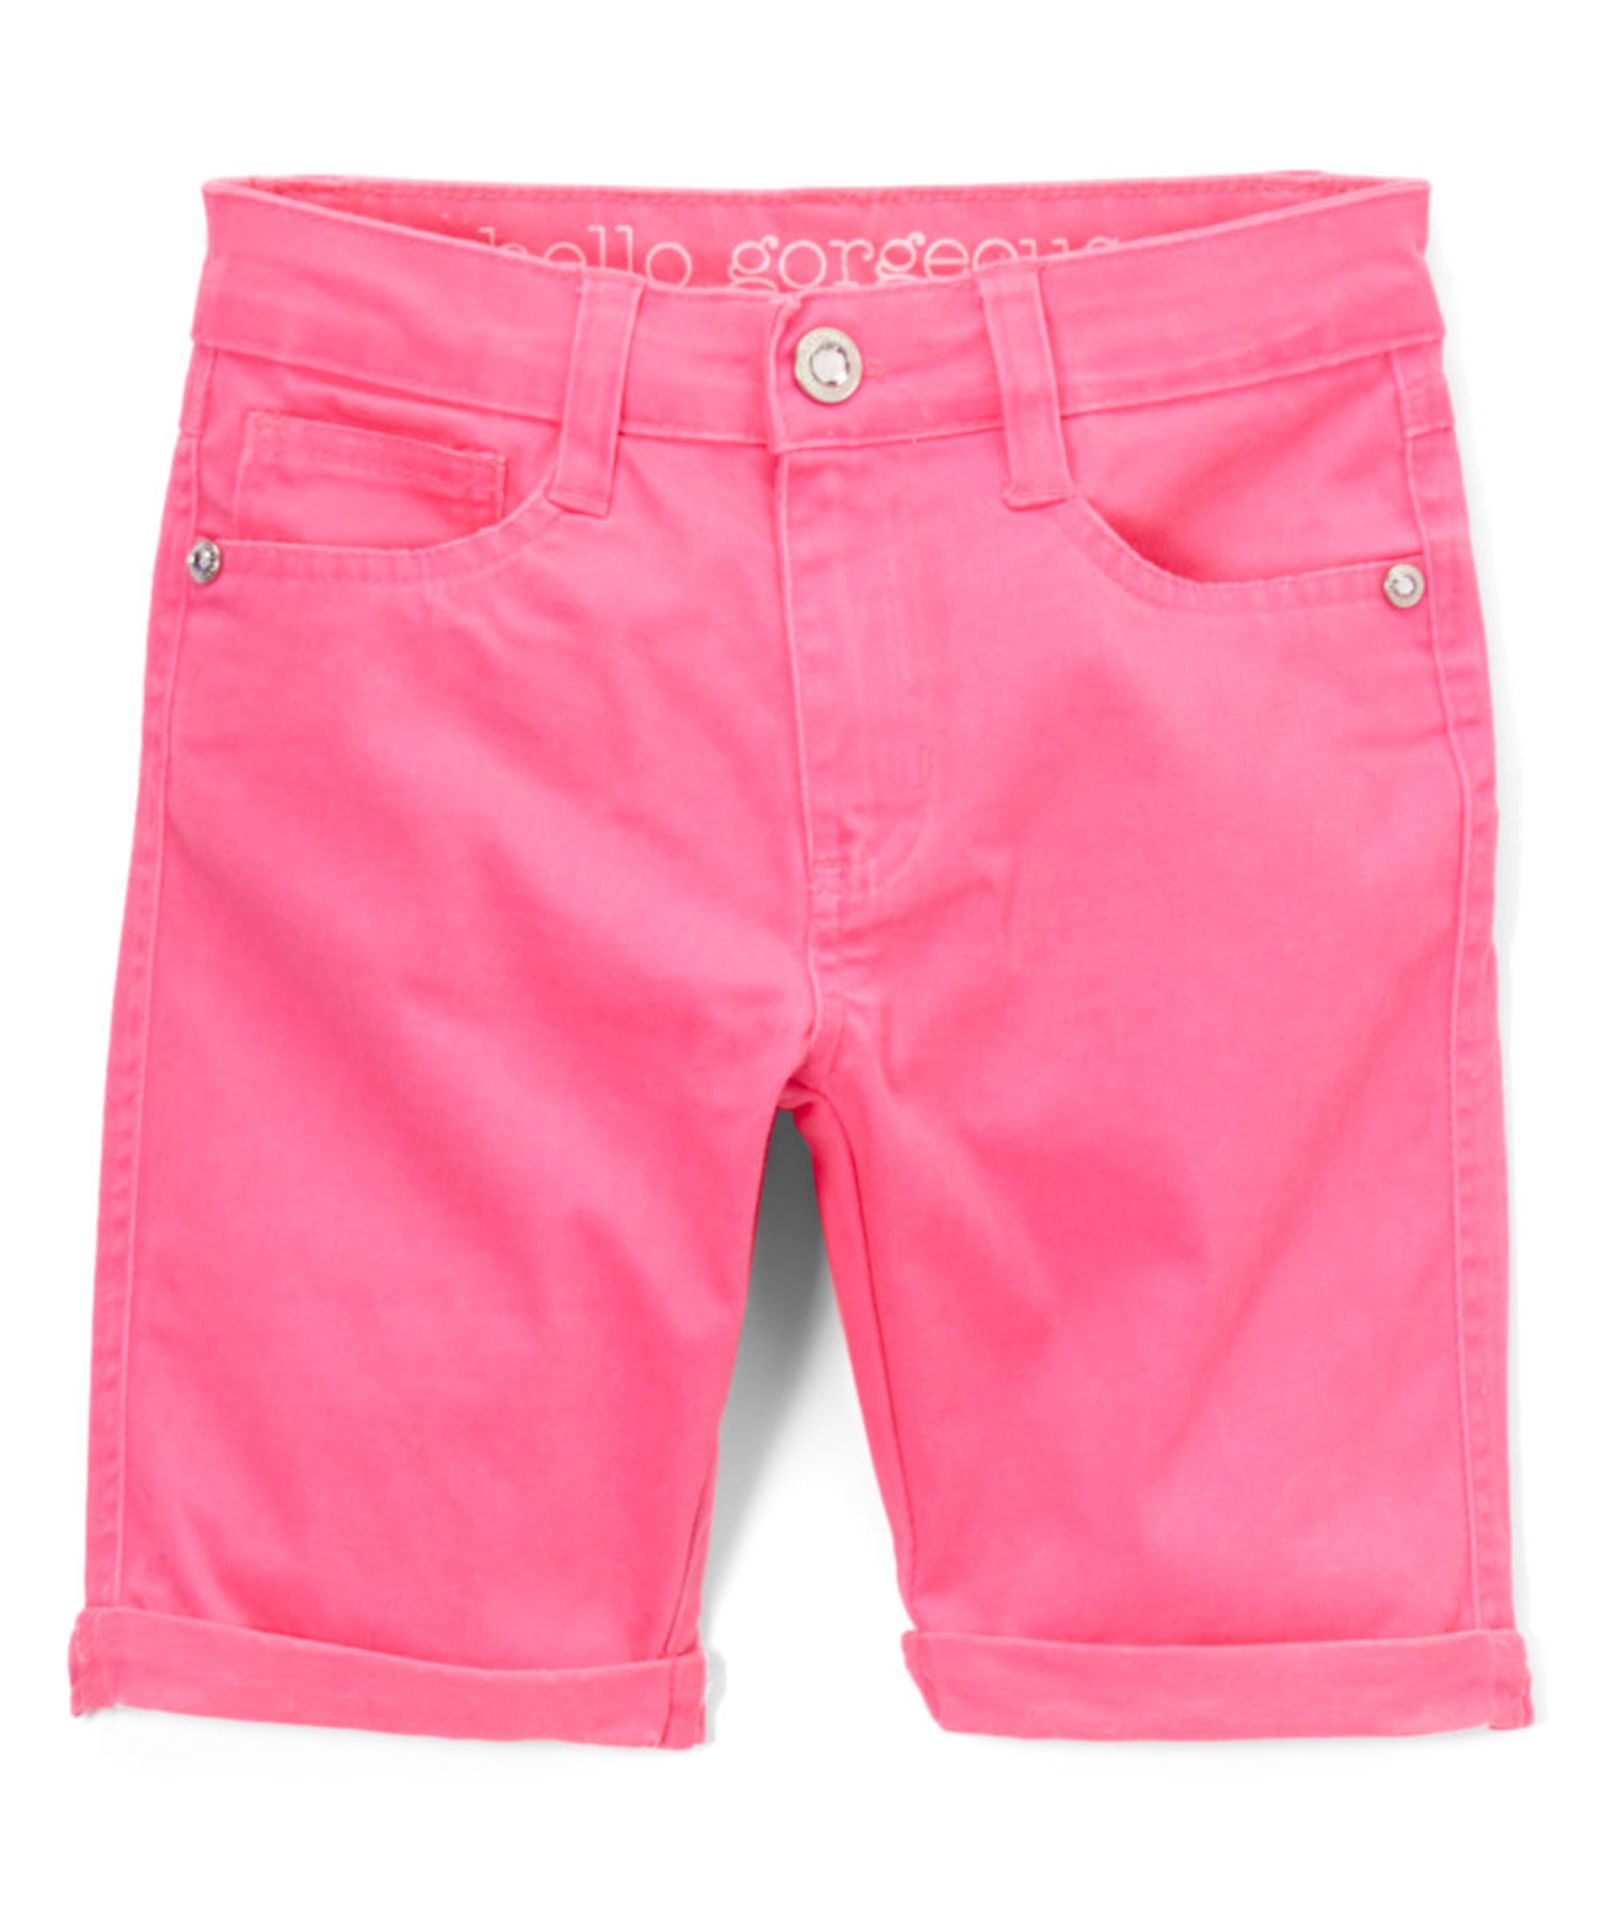 Hello Gorgeous Neon Hot Pink Bermuda Shorts (Age 10 yrs) (New with tags) [Ref: 46173614- T-71]